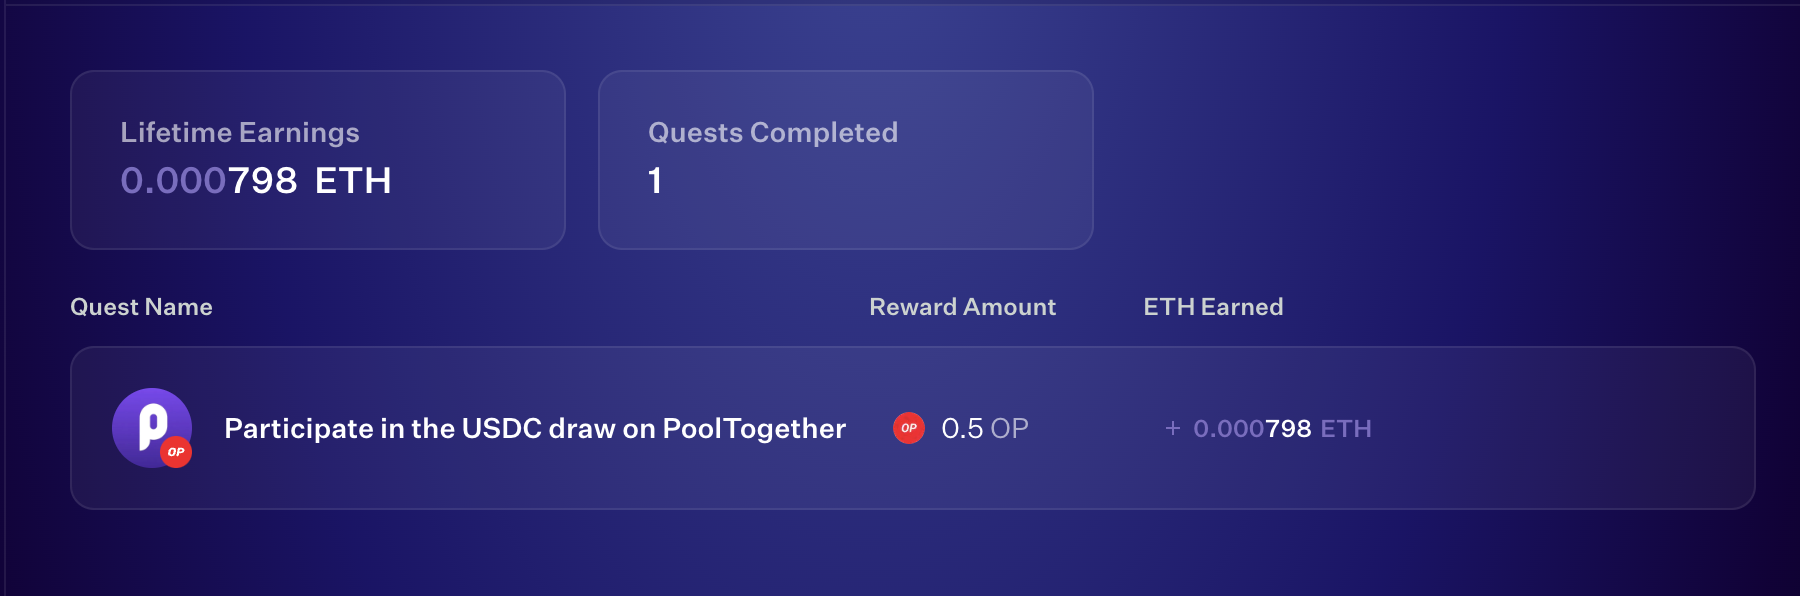 You can view your ETH Earned on the Rewards Page